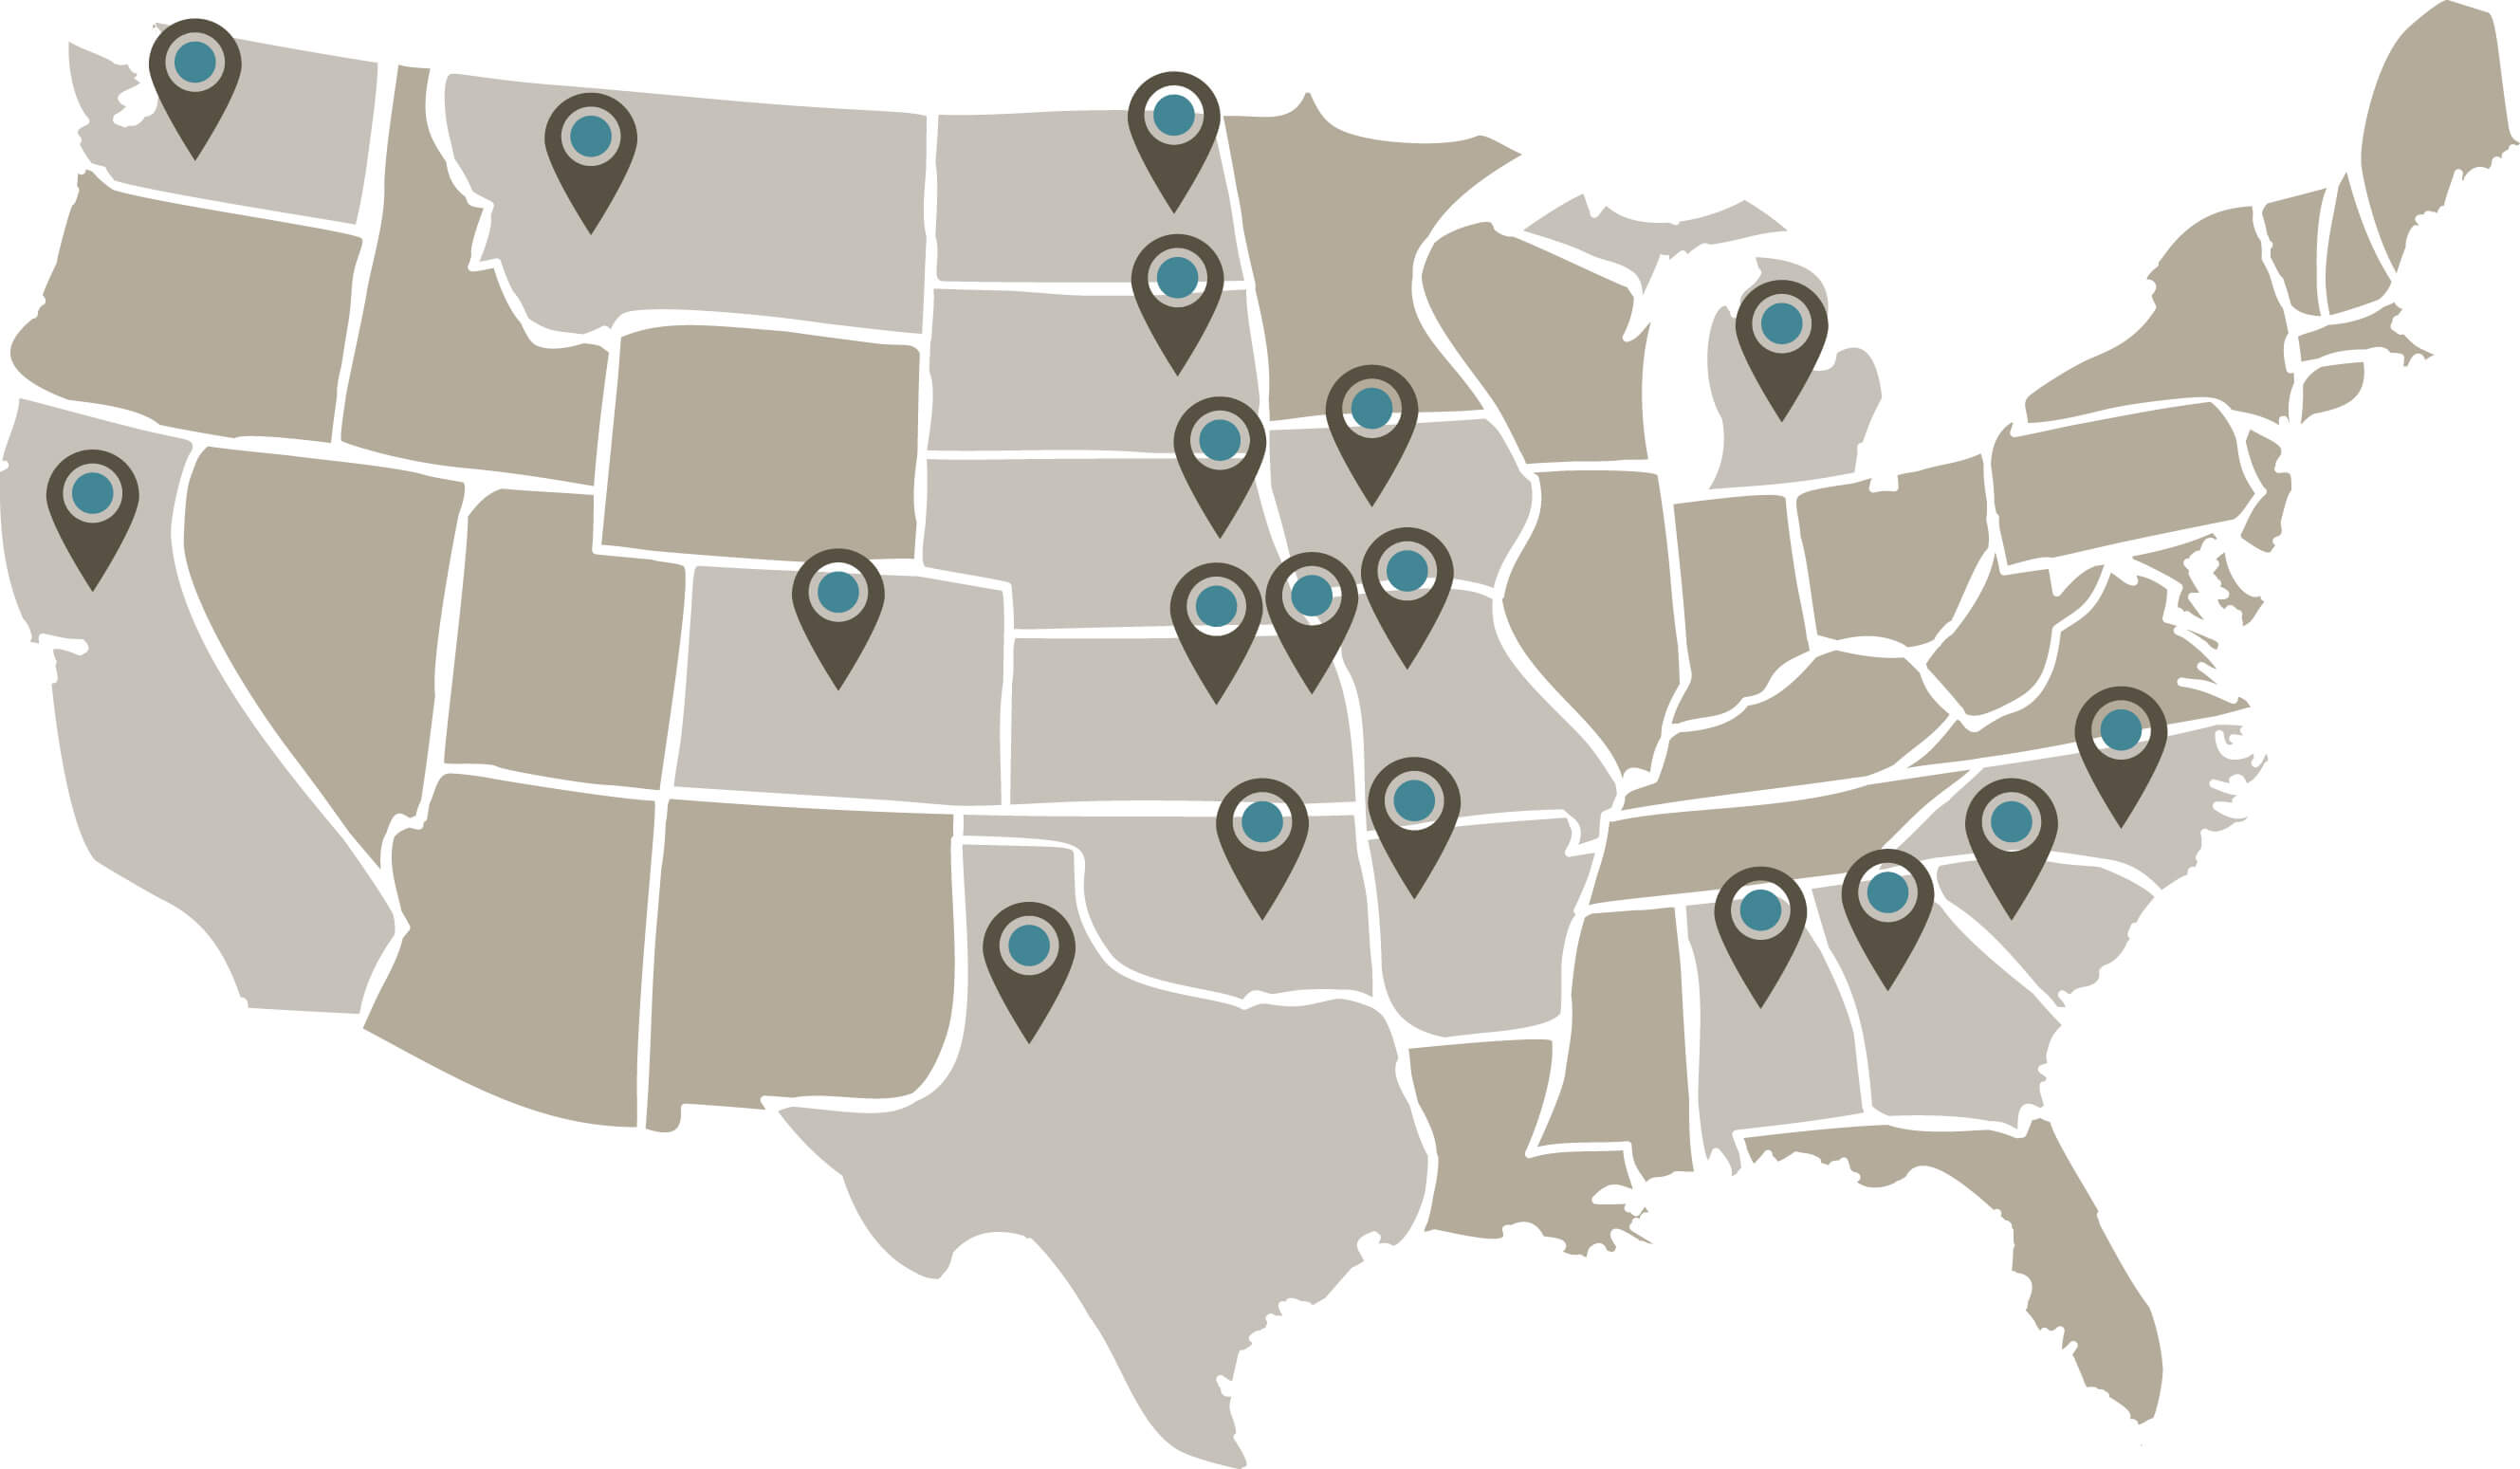 Map of the United States with pin points on the locations of member universities.